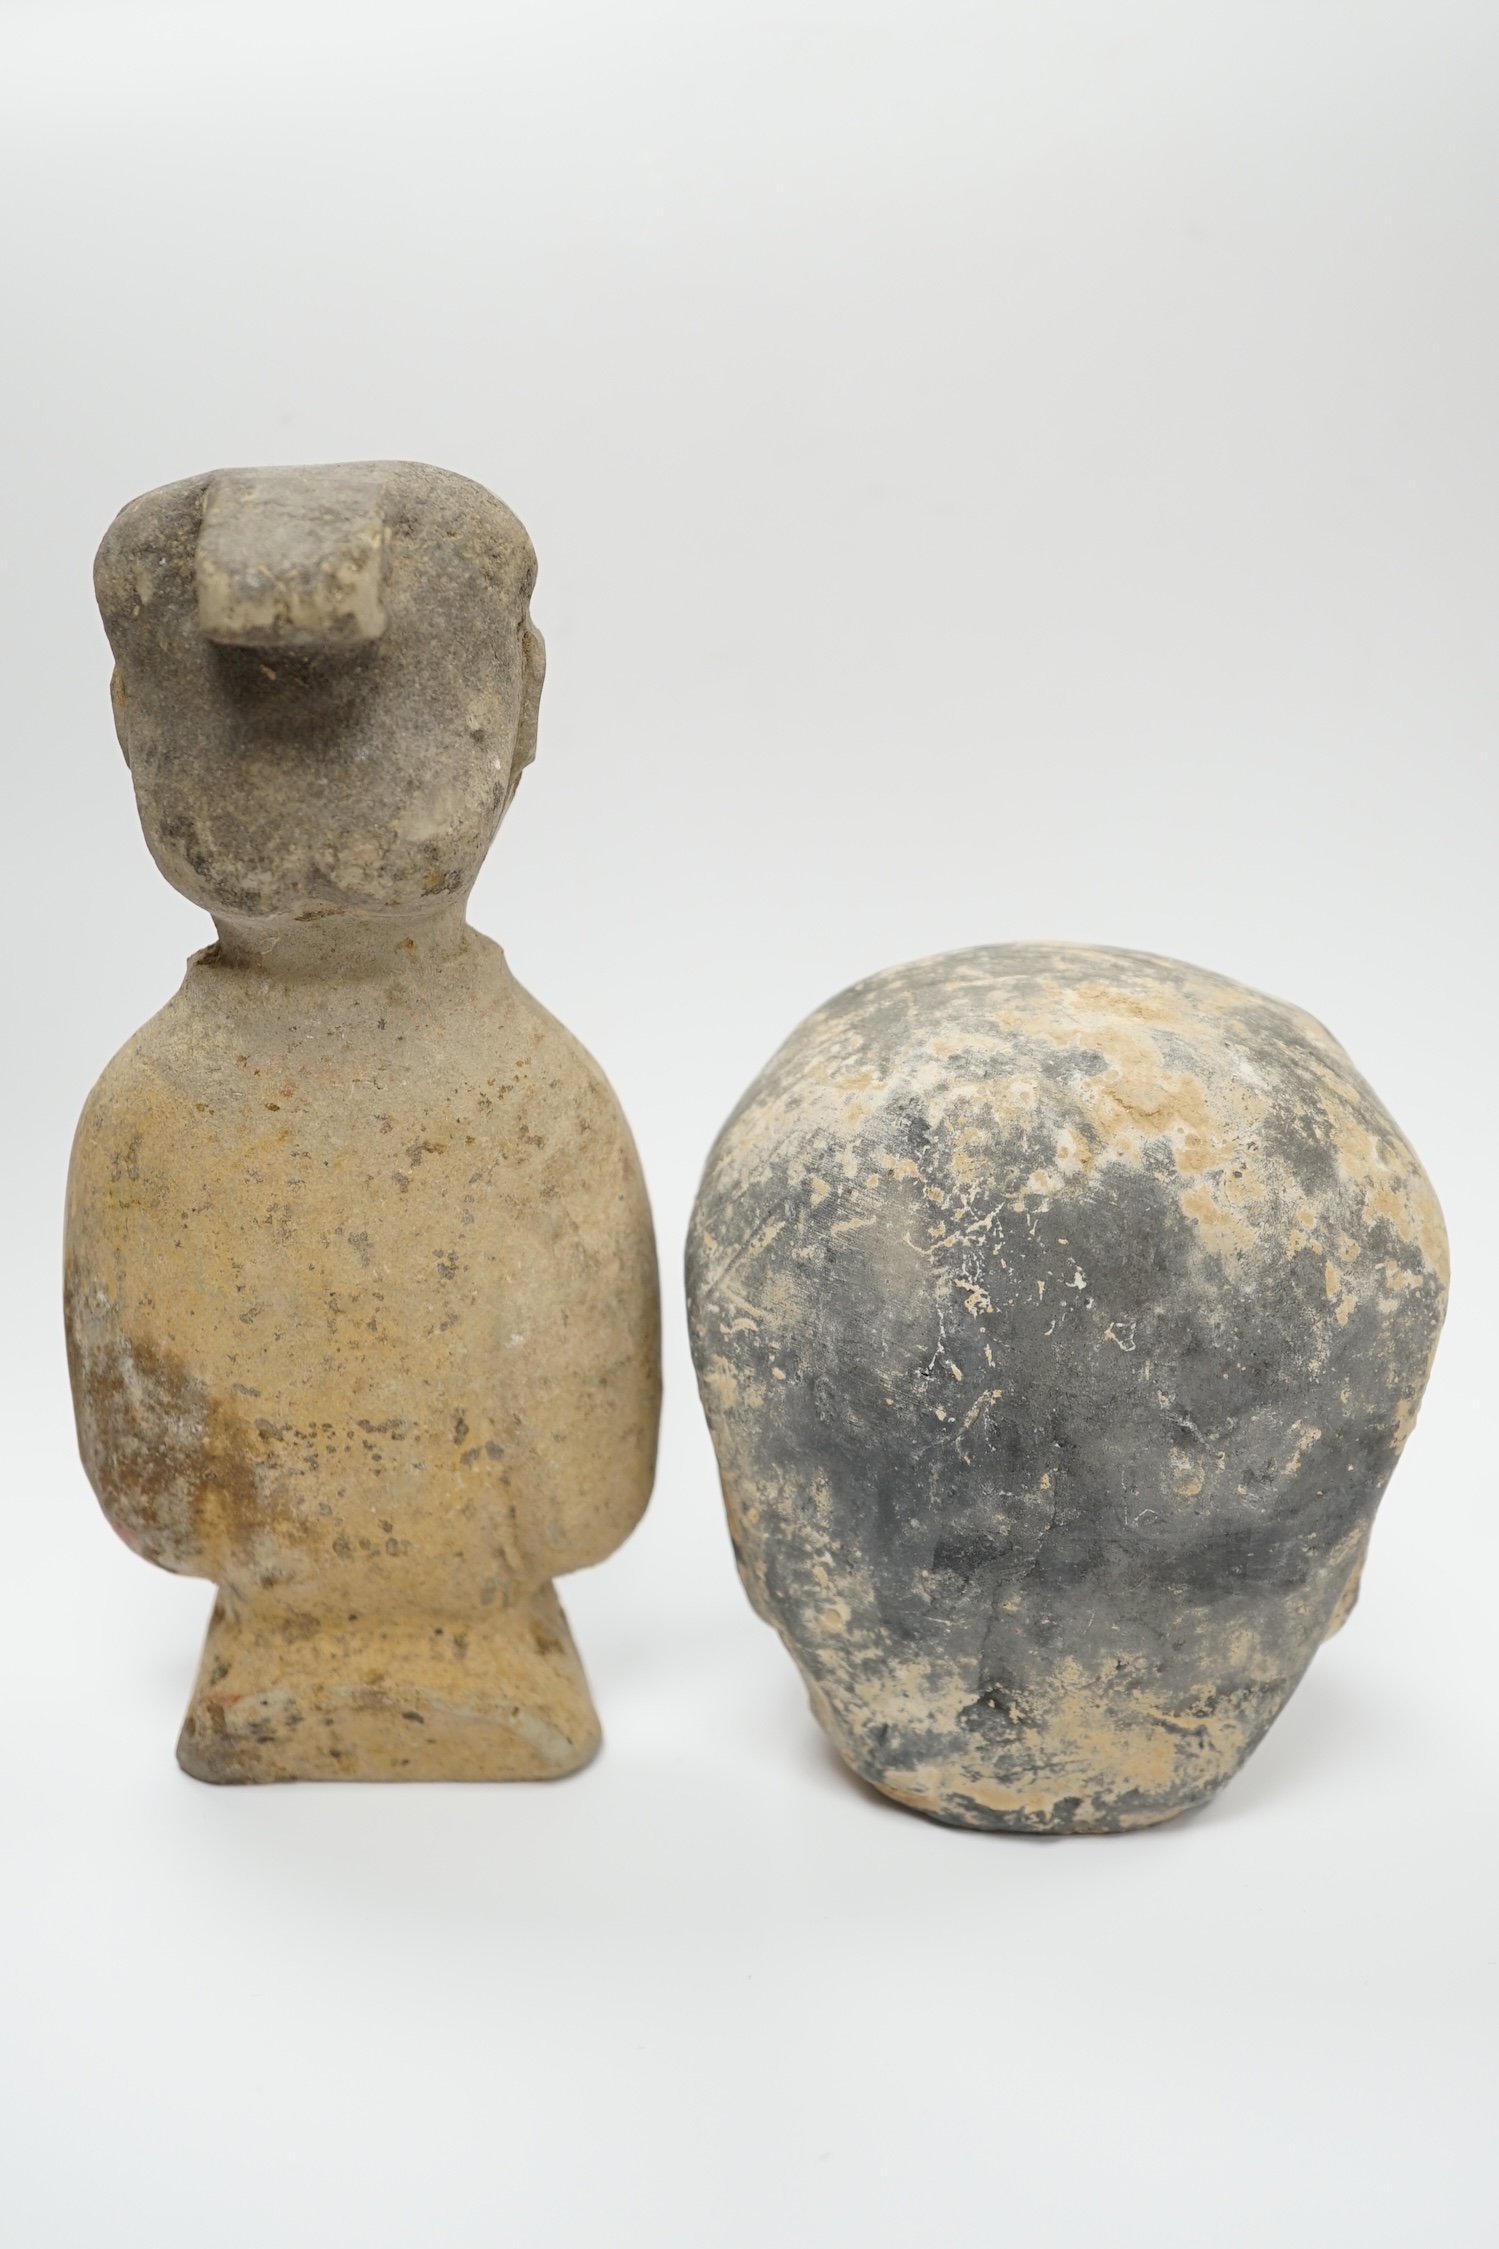 A Chinese grey pottery head and a bust, Han dynasty, tallest 17cm